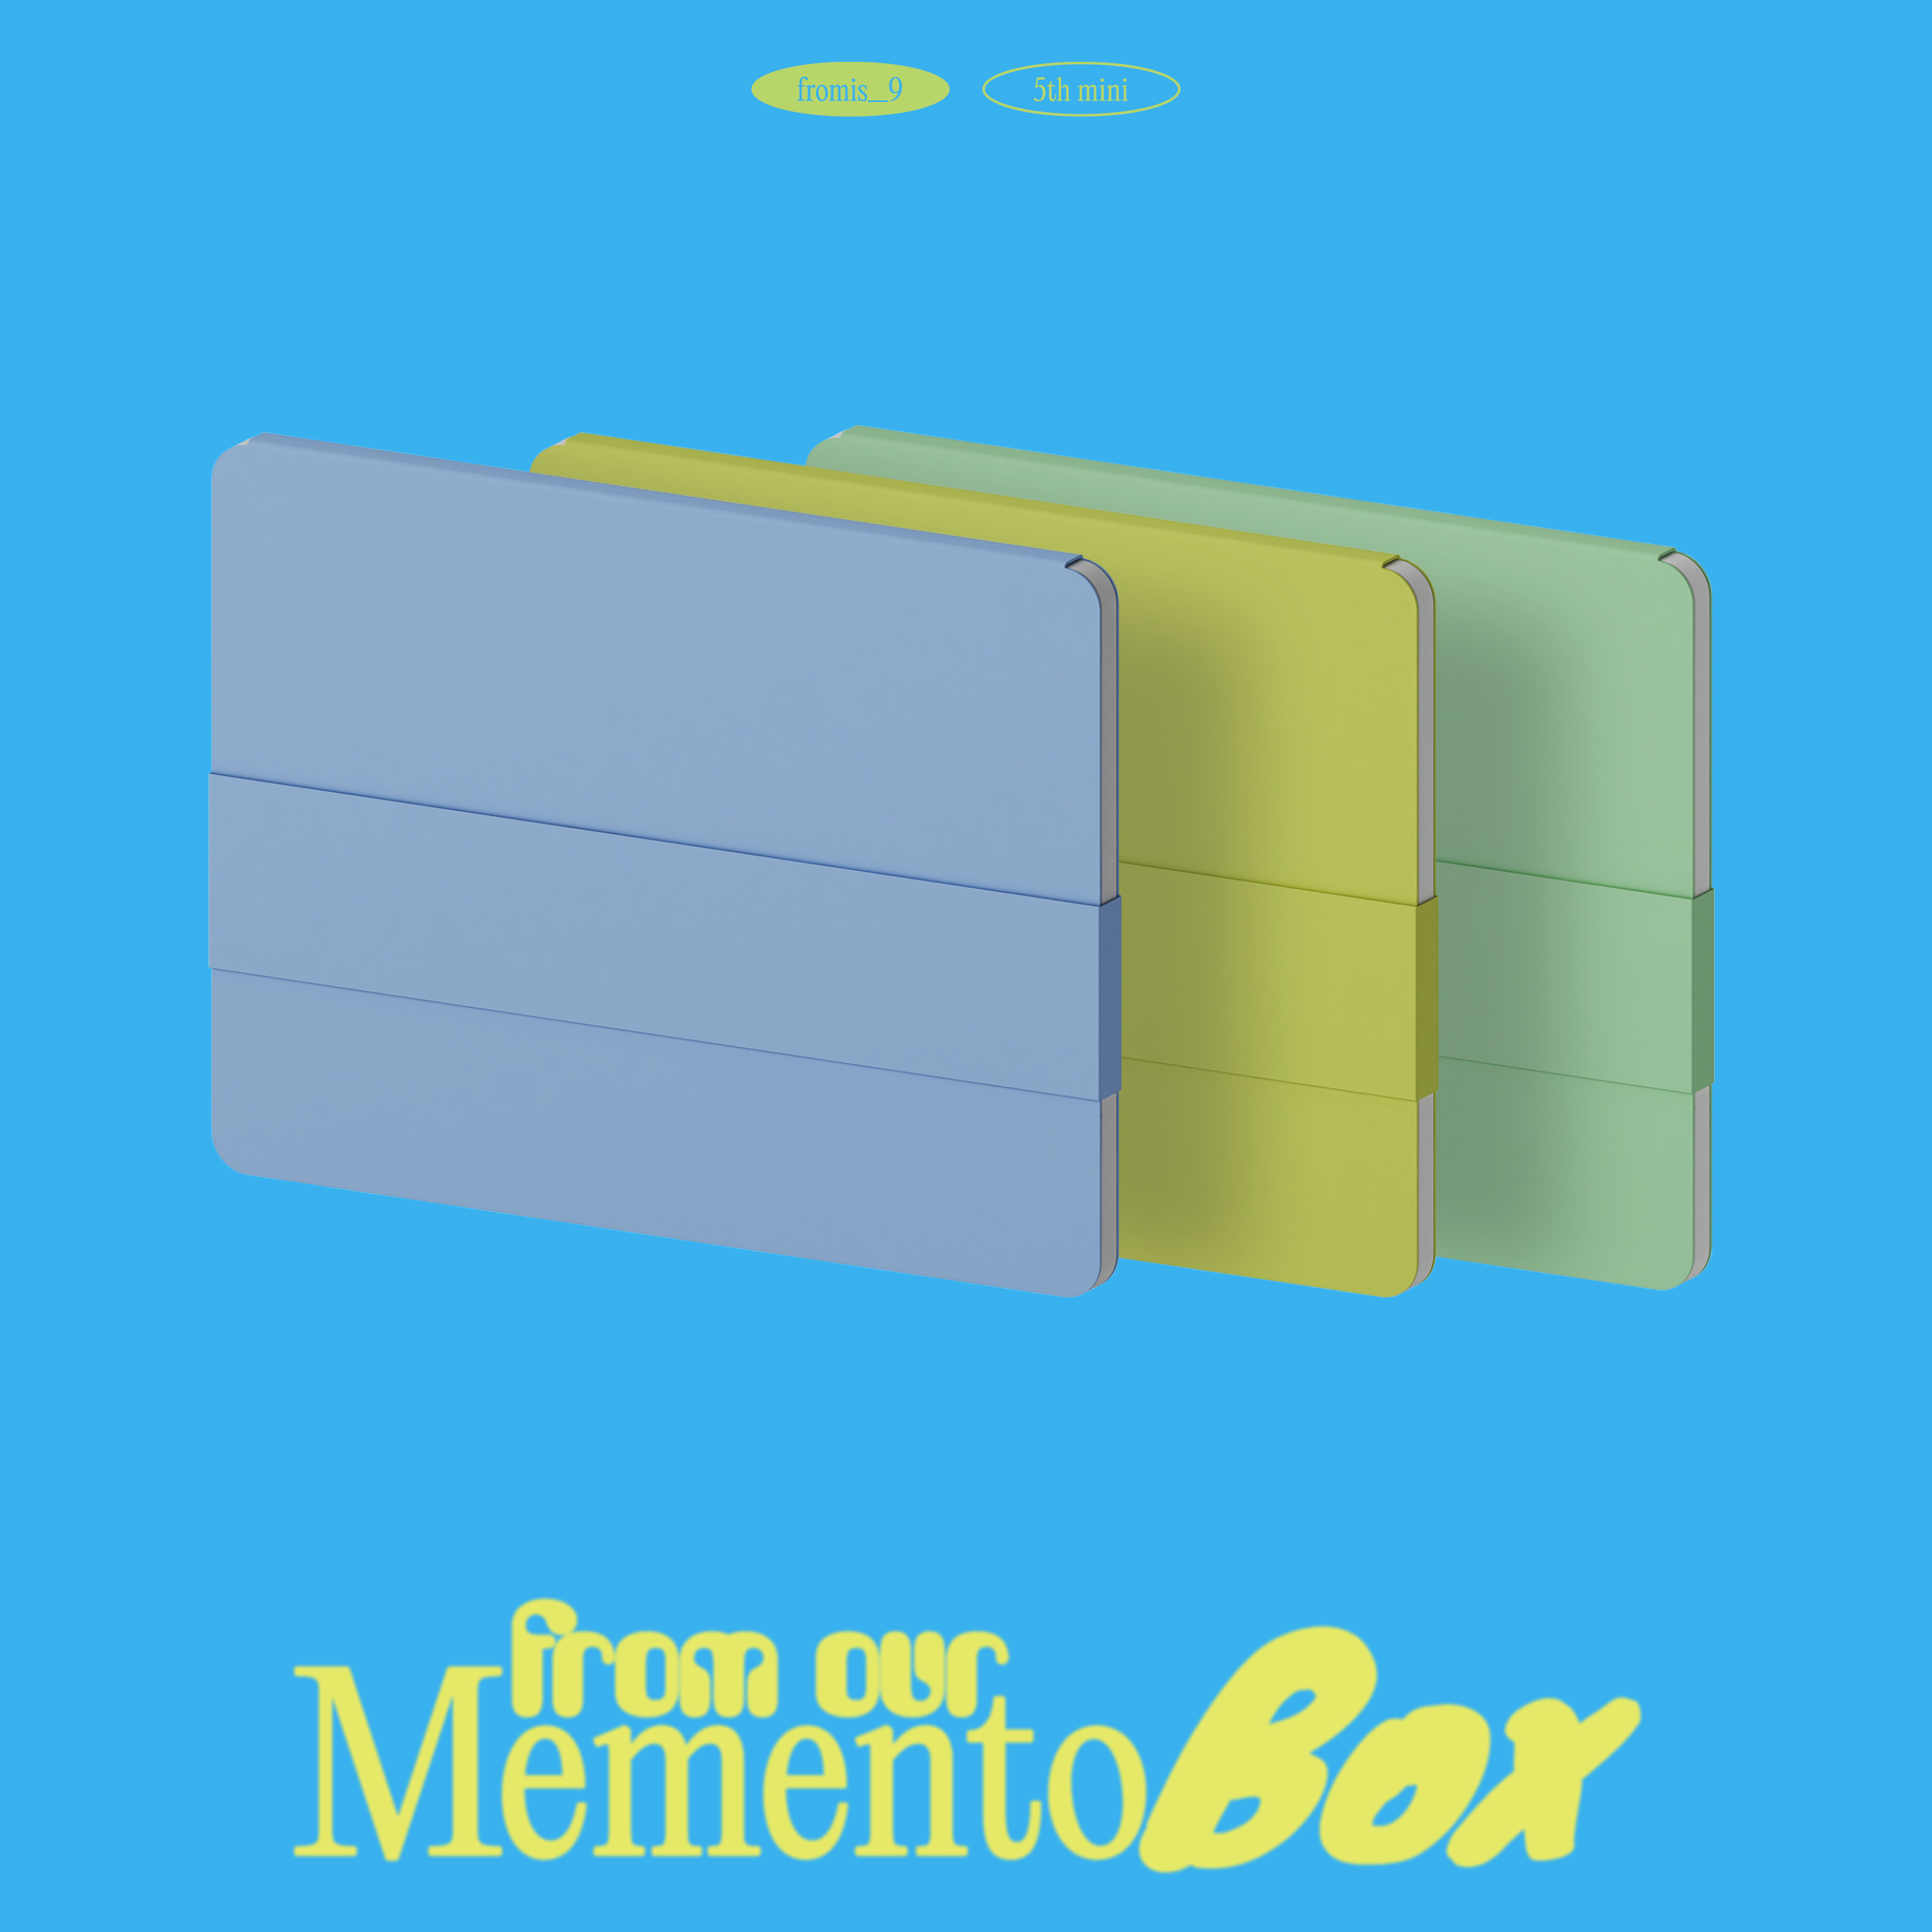 [Set]fromis_9 - 5th Mini Album [from our Memento Box]